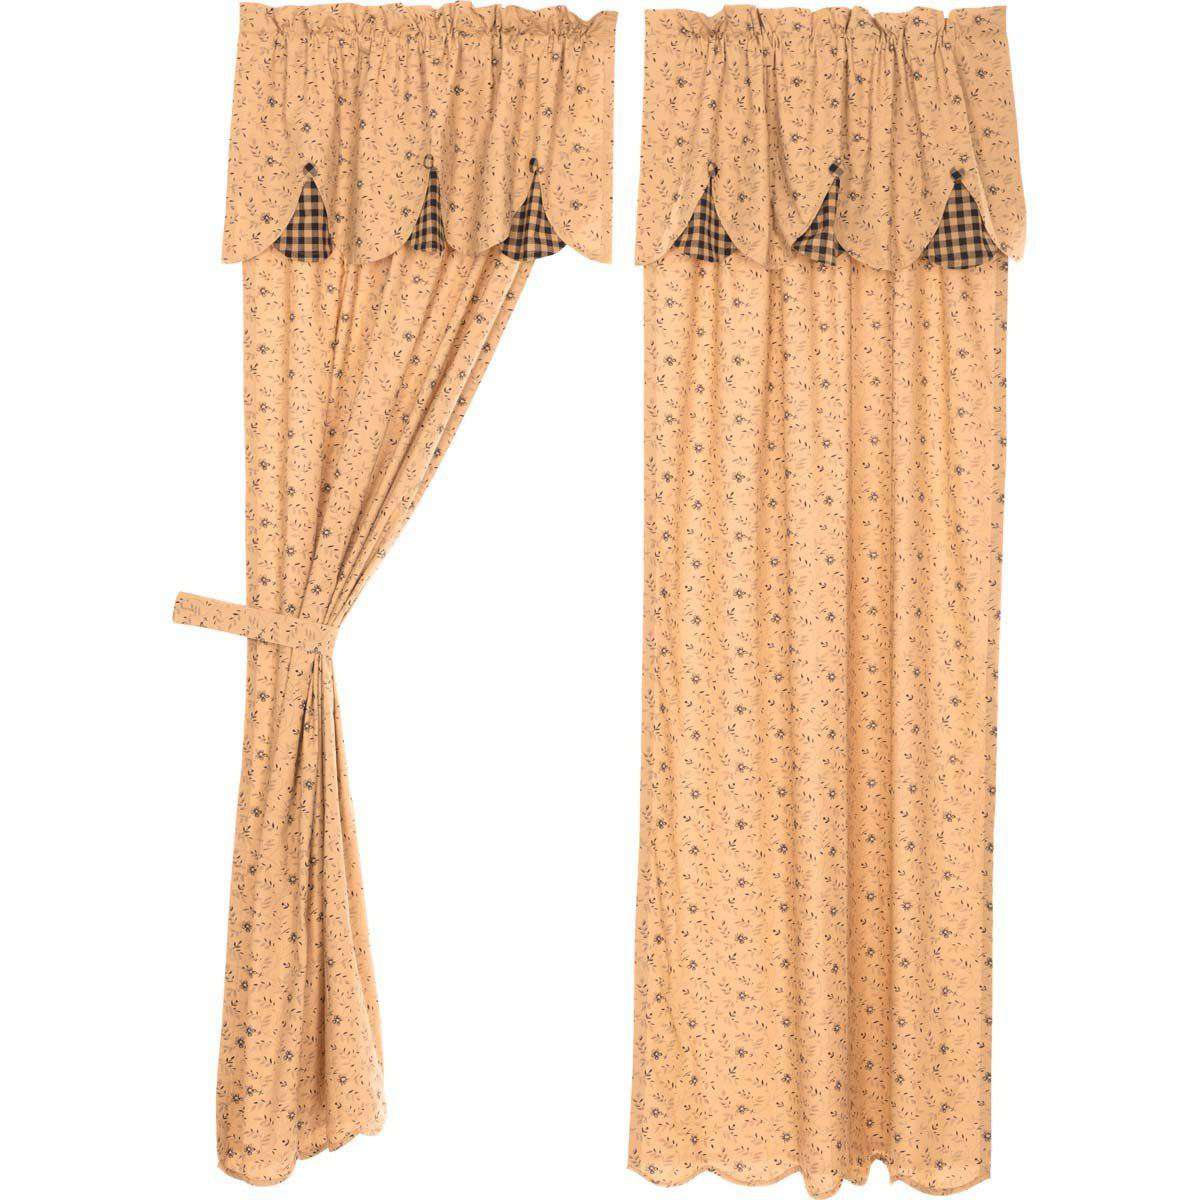 Maisie Panel Curtain with Attached Scalloped Layered Valance Country Style Curtain Set of 2 84"x40" - The Fox Decor